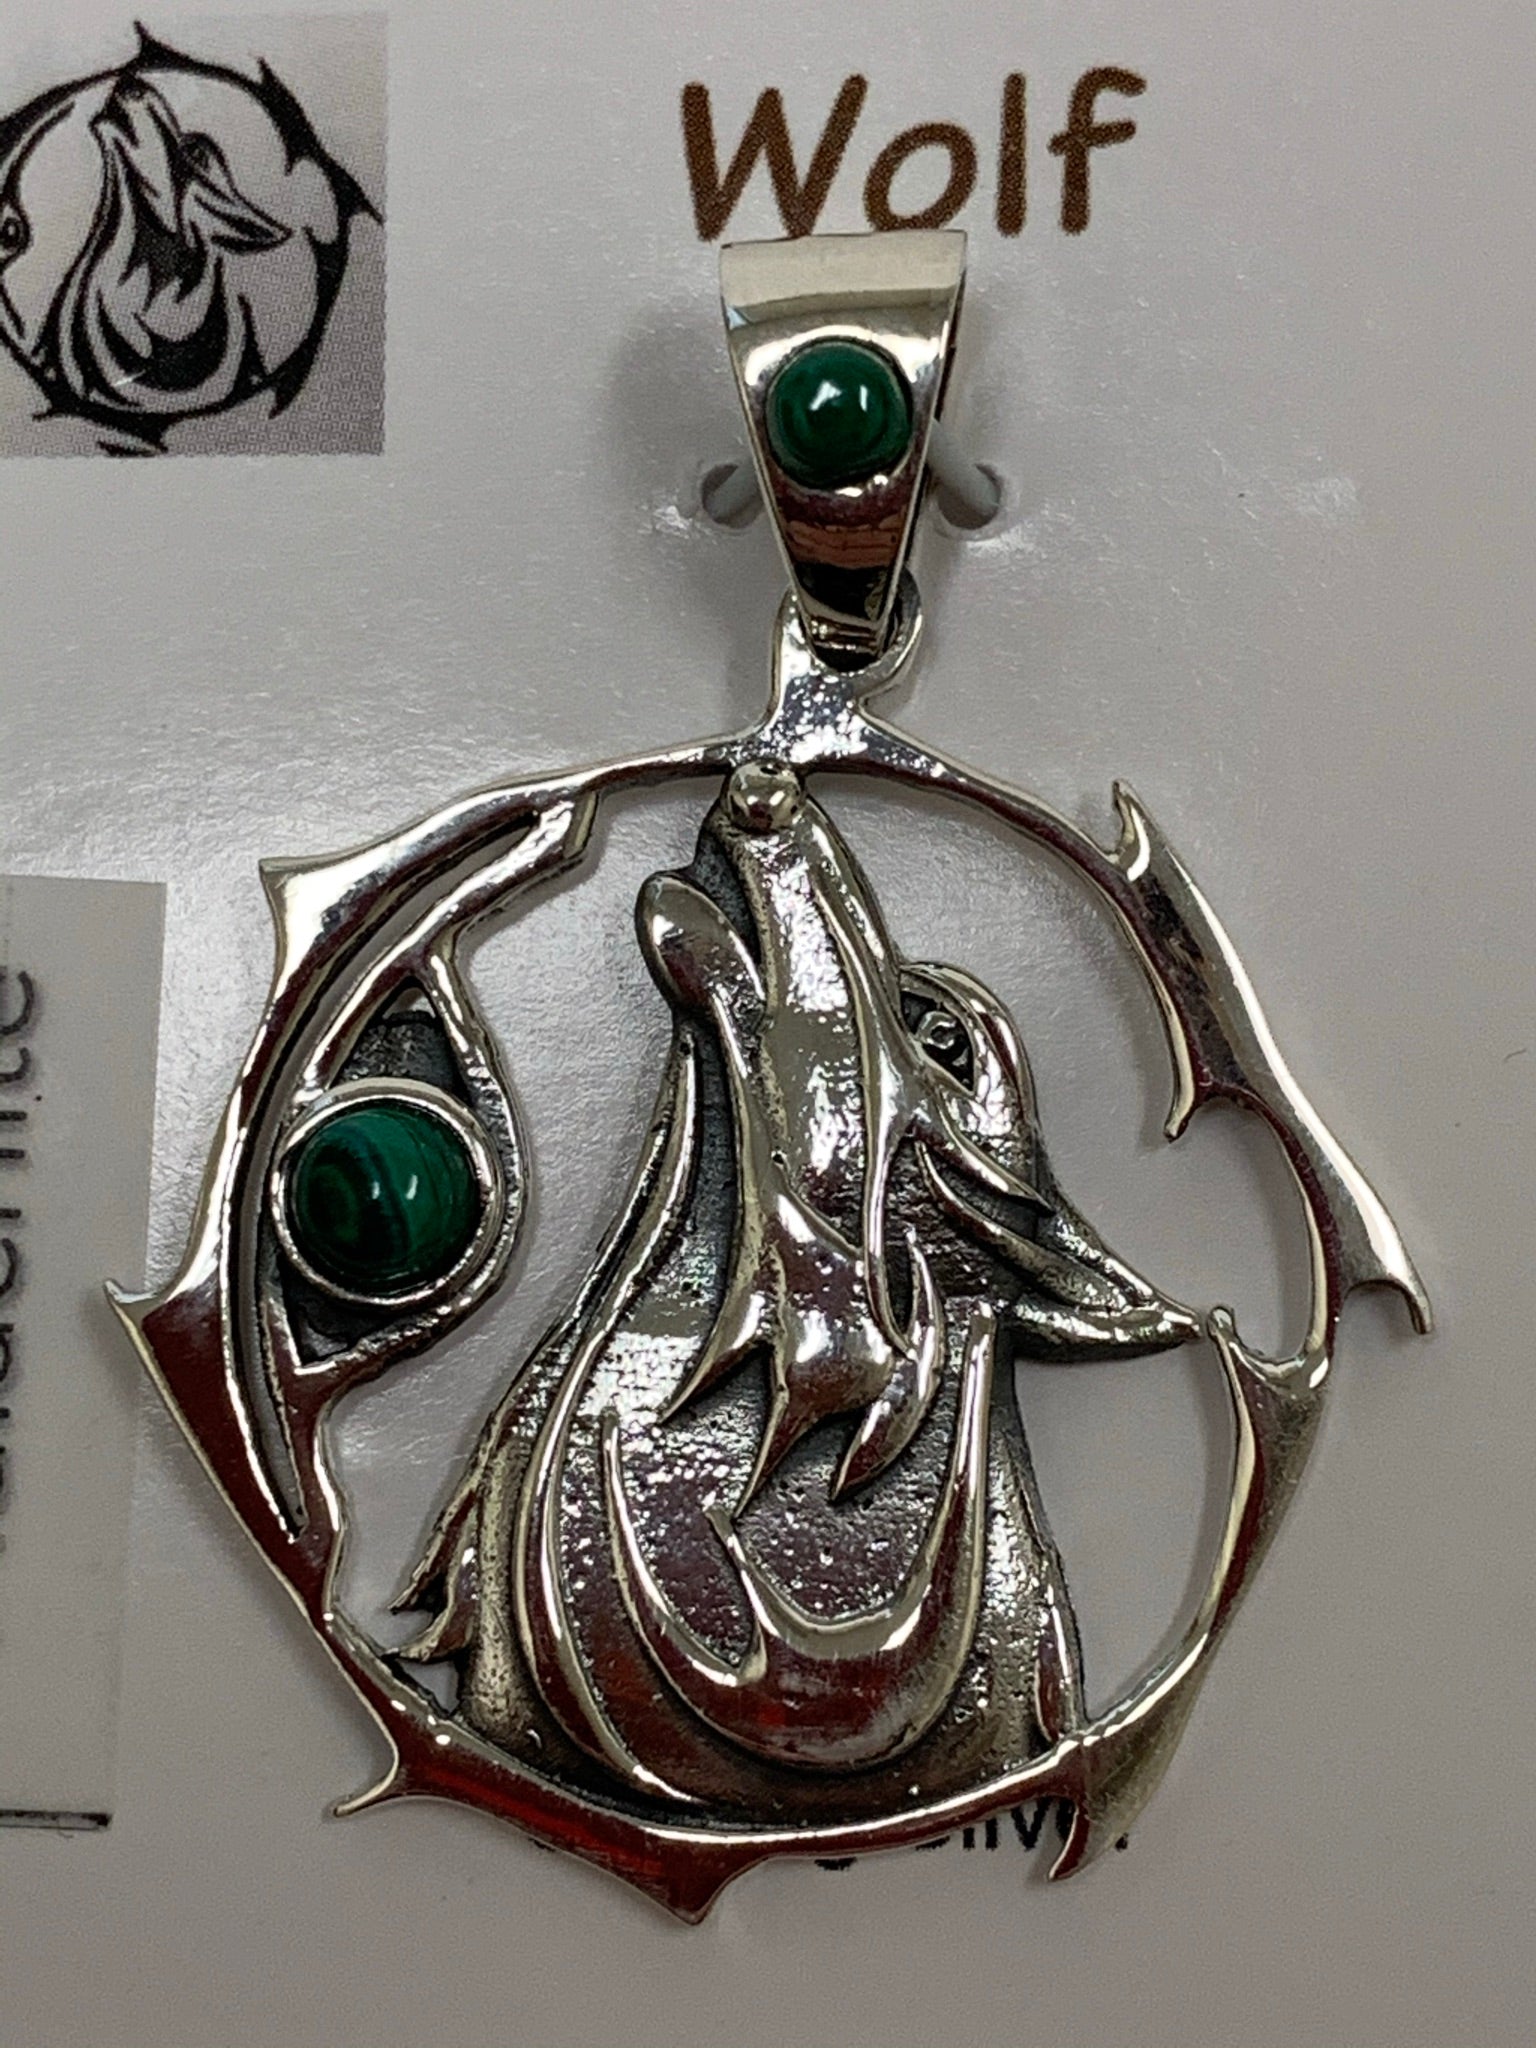 Close-up view of sterling Silver wolf spirit animal pendant. Howling wolf (head and part of body) inside a fancy, stylized circle. Two malachite gemstones (cabs), one on the actual pendant and one on the bail. Wear your spirit animal on your chest and carry it with you wherever you go! (Pendant only, no necklace chain).